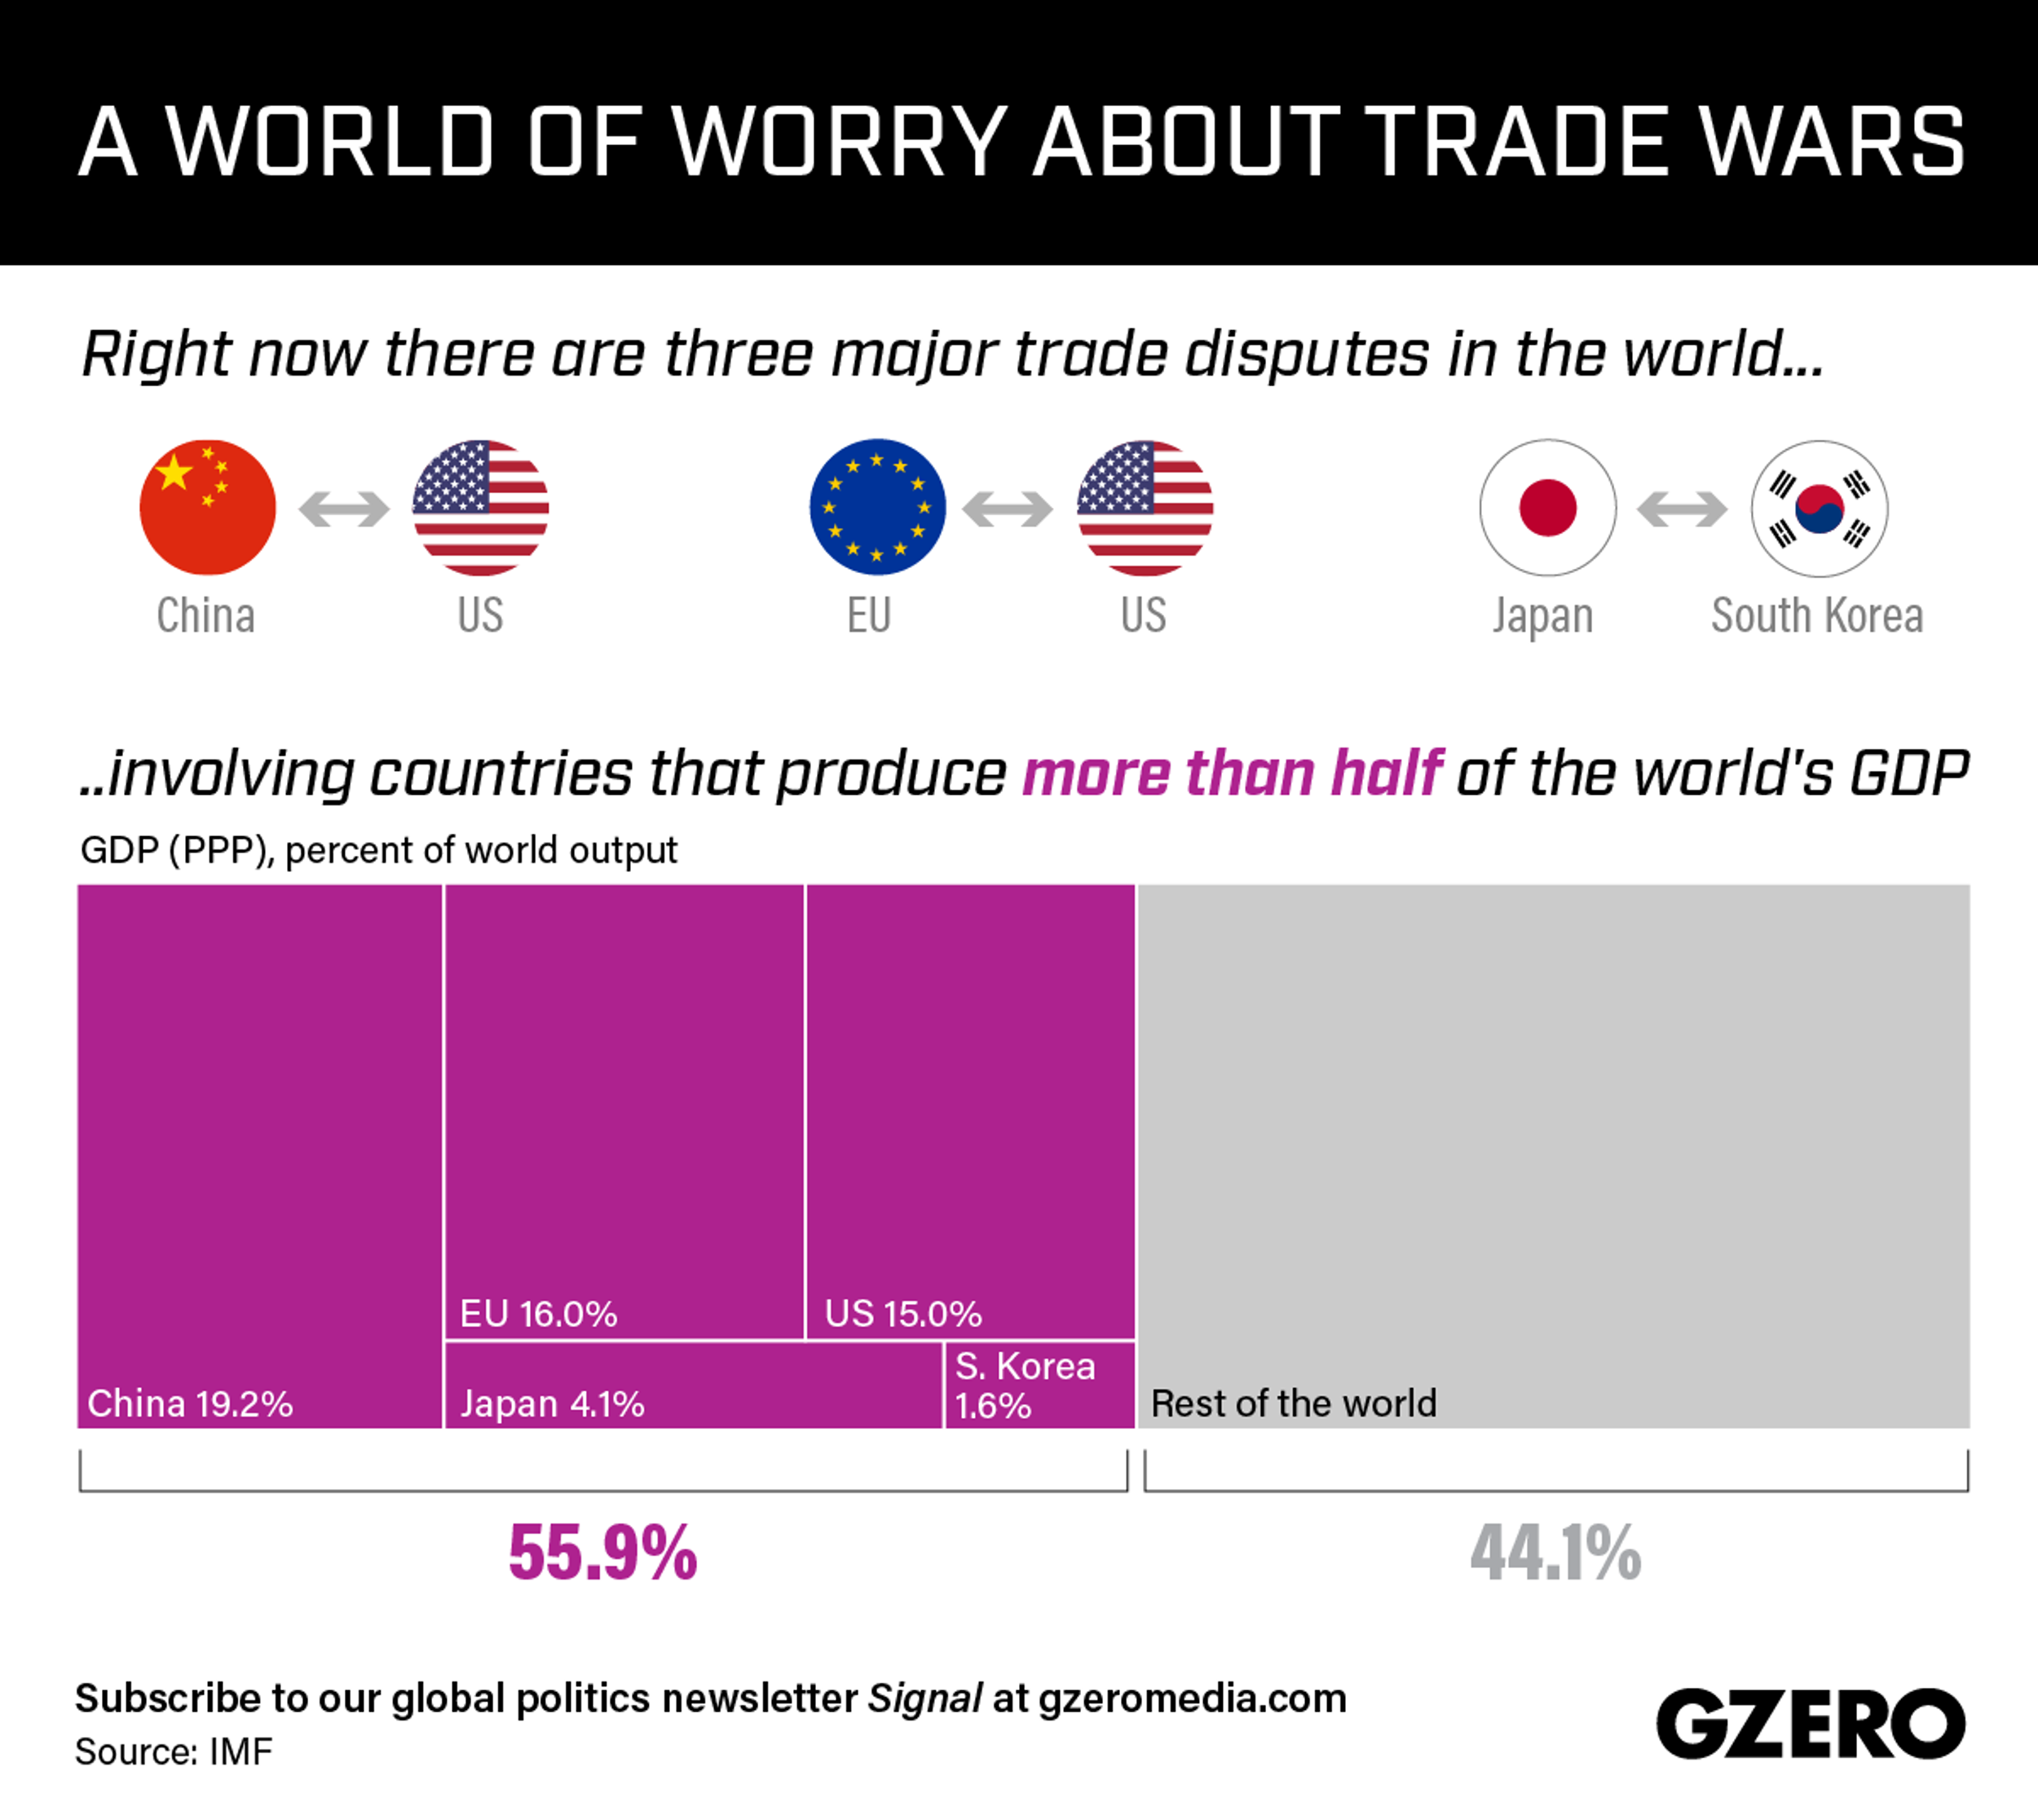 These Three Disputes Affect More Than Half of the World Economy